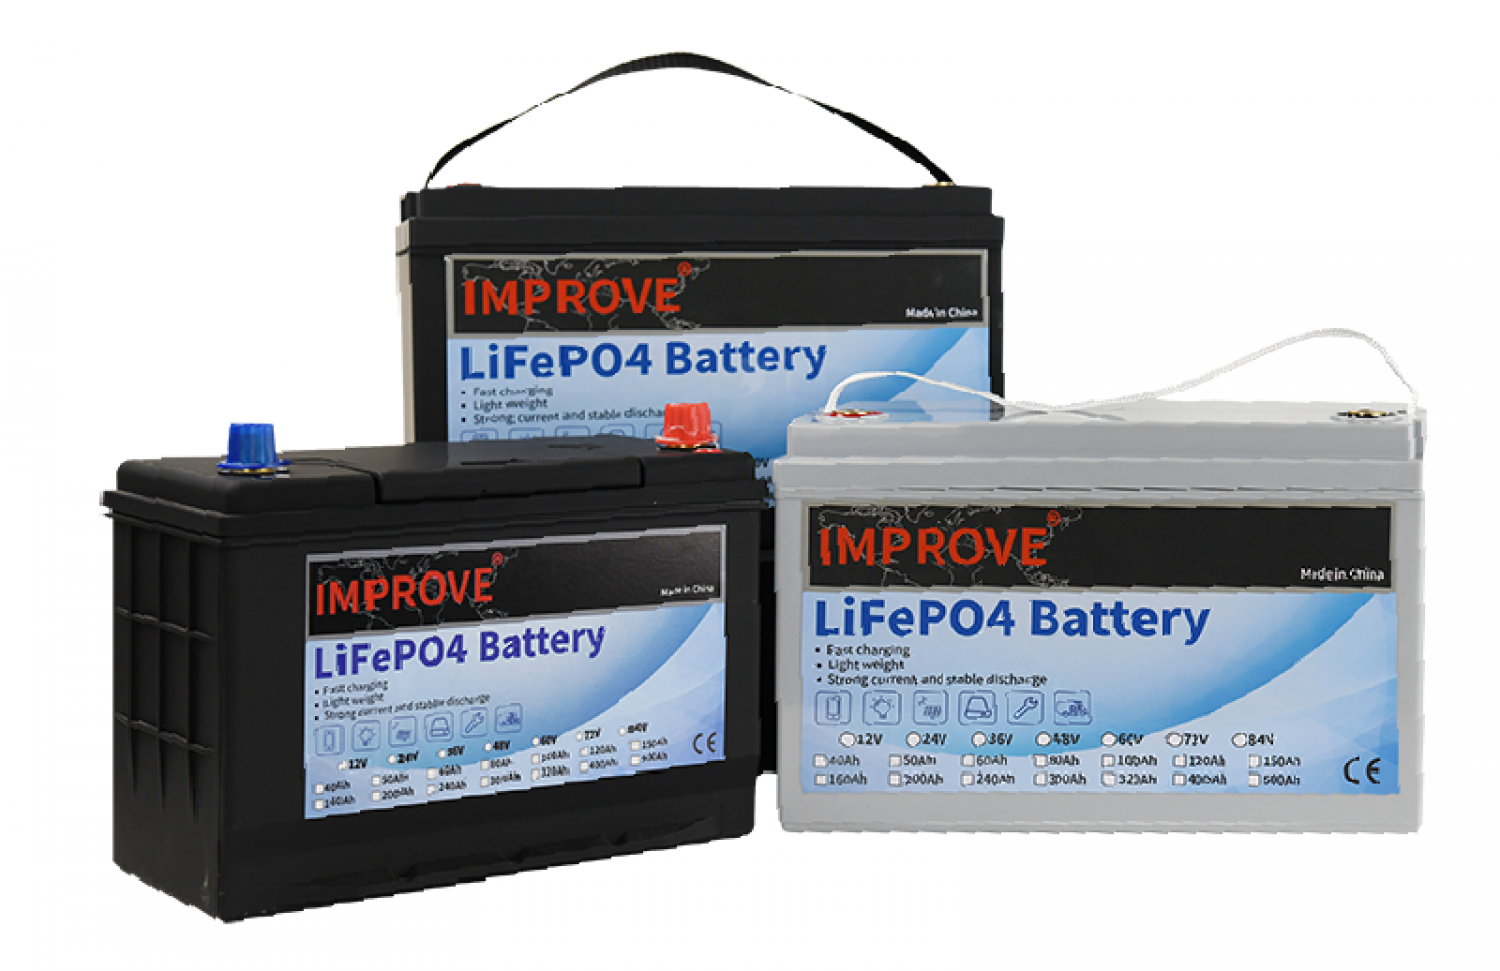 What Is LiFePO4 and Why Is It a Better Choice?